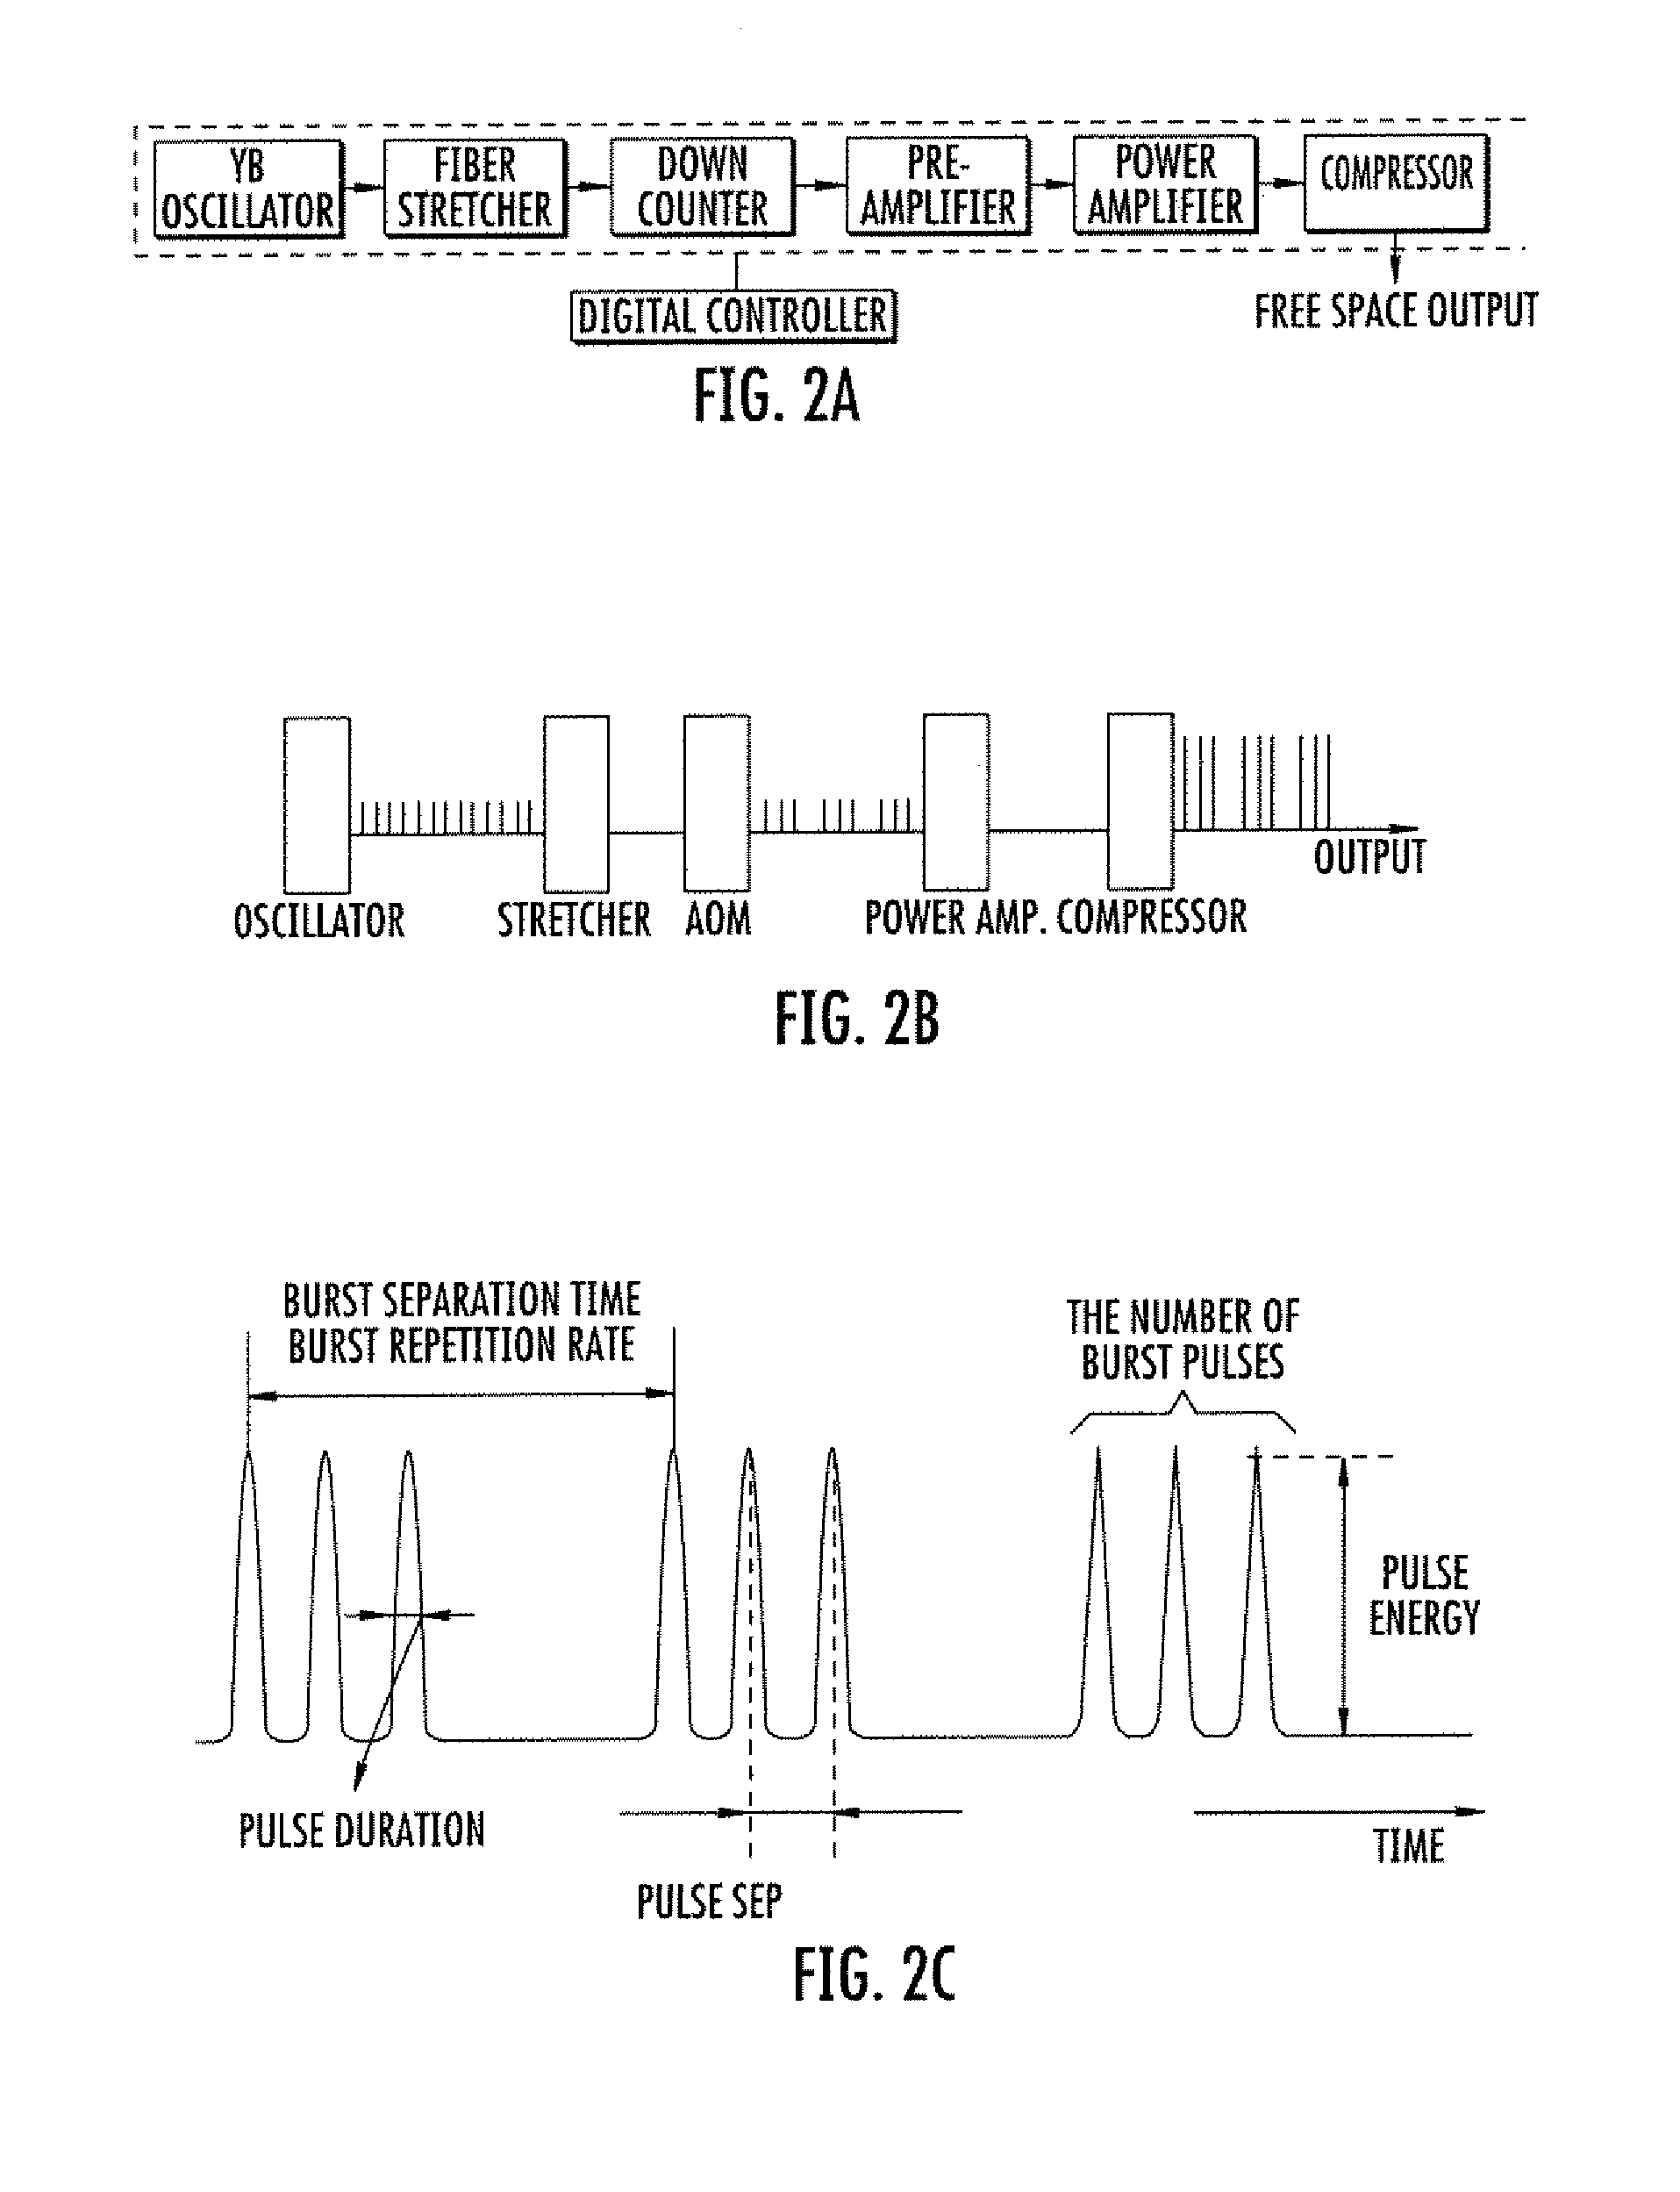  method and apparatus to prepare a substrate for molecular detection